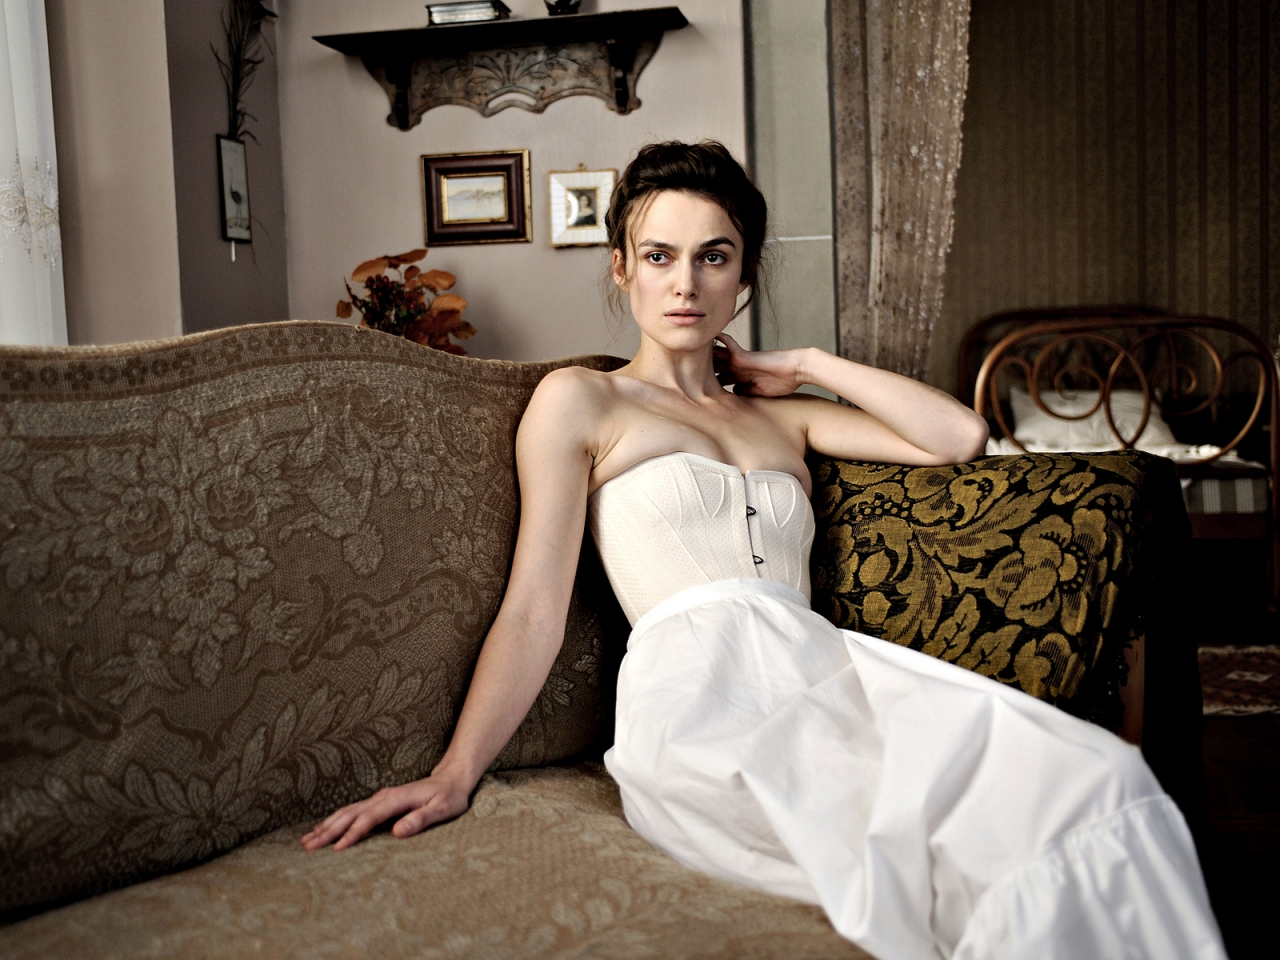 Keira Knightley A Dangerous Method for 1280 x 960 resolution